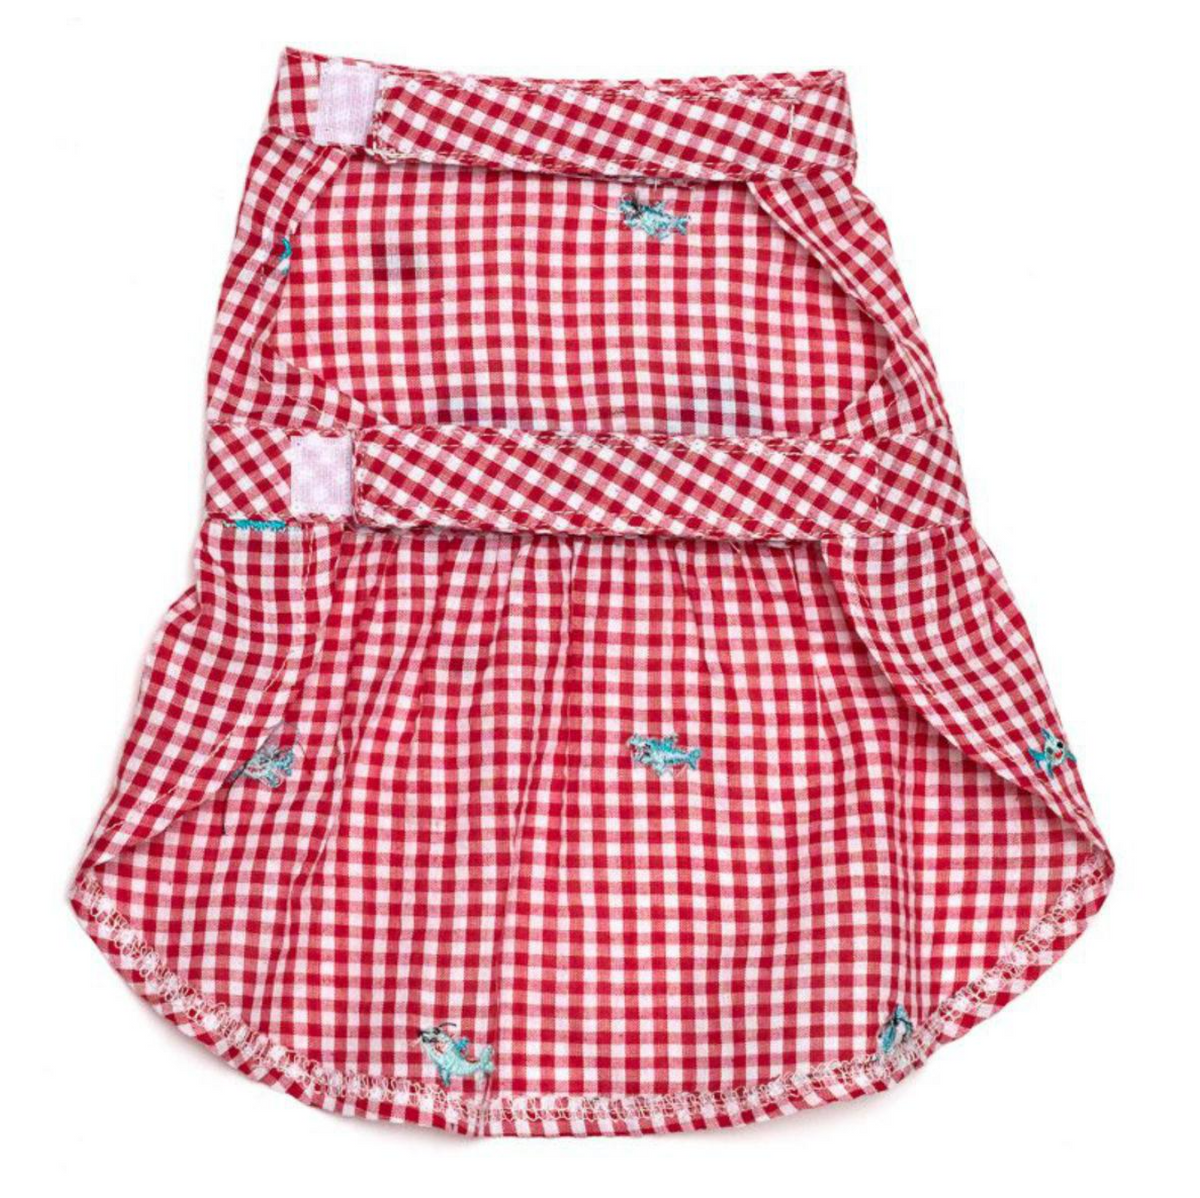 Gingham Chomp Dress - 3 Red Rovers